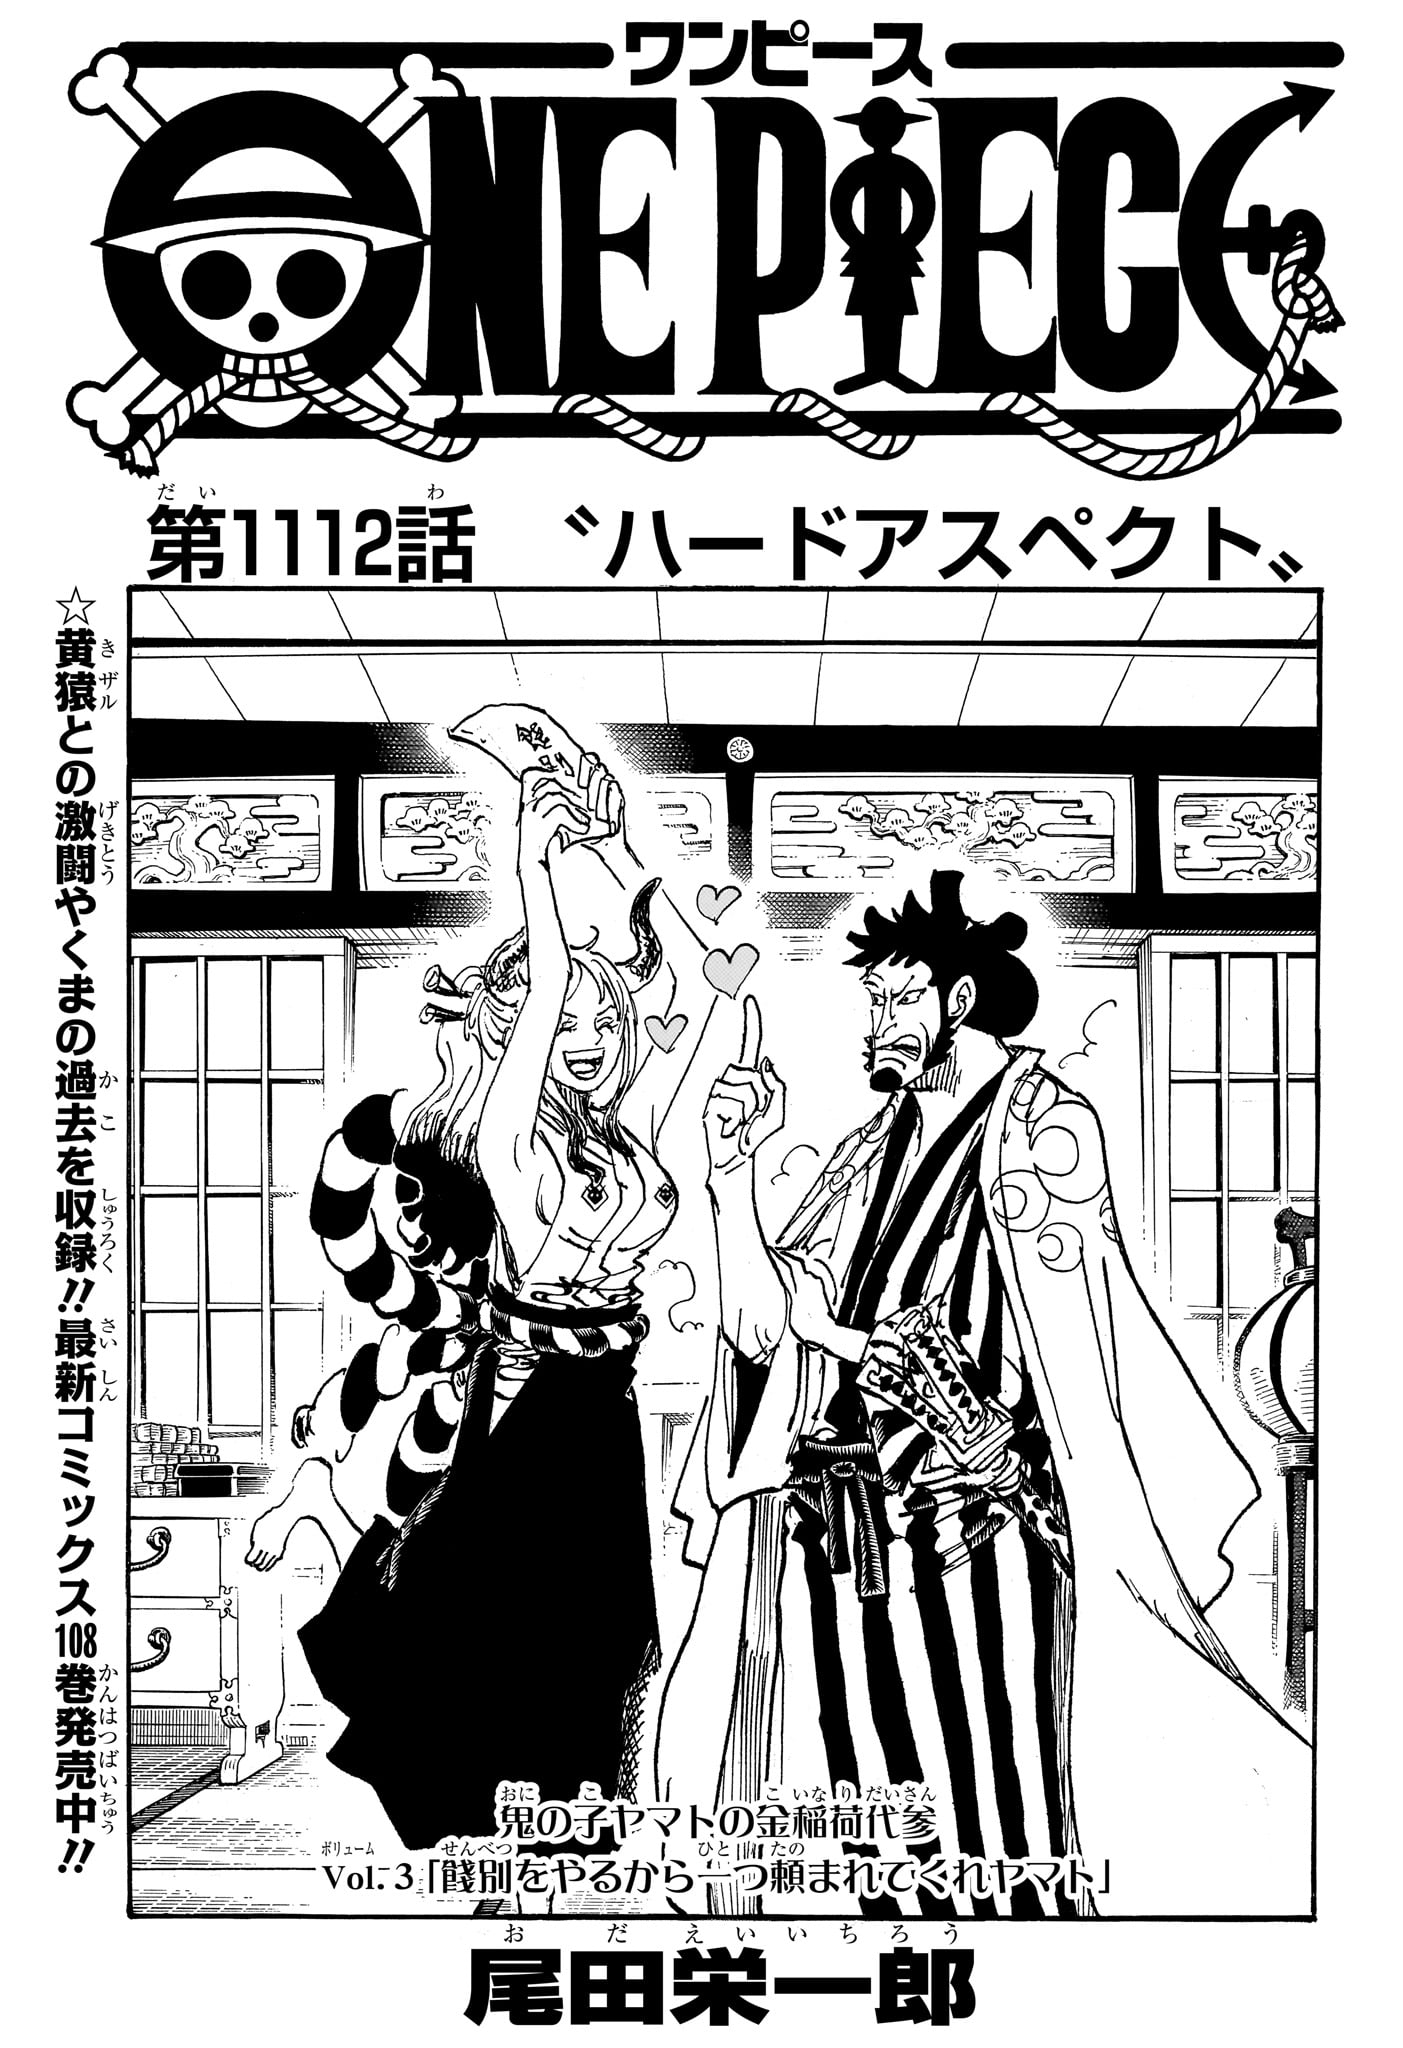 One Piece - Chapter 1112 - Page 1